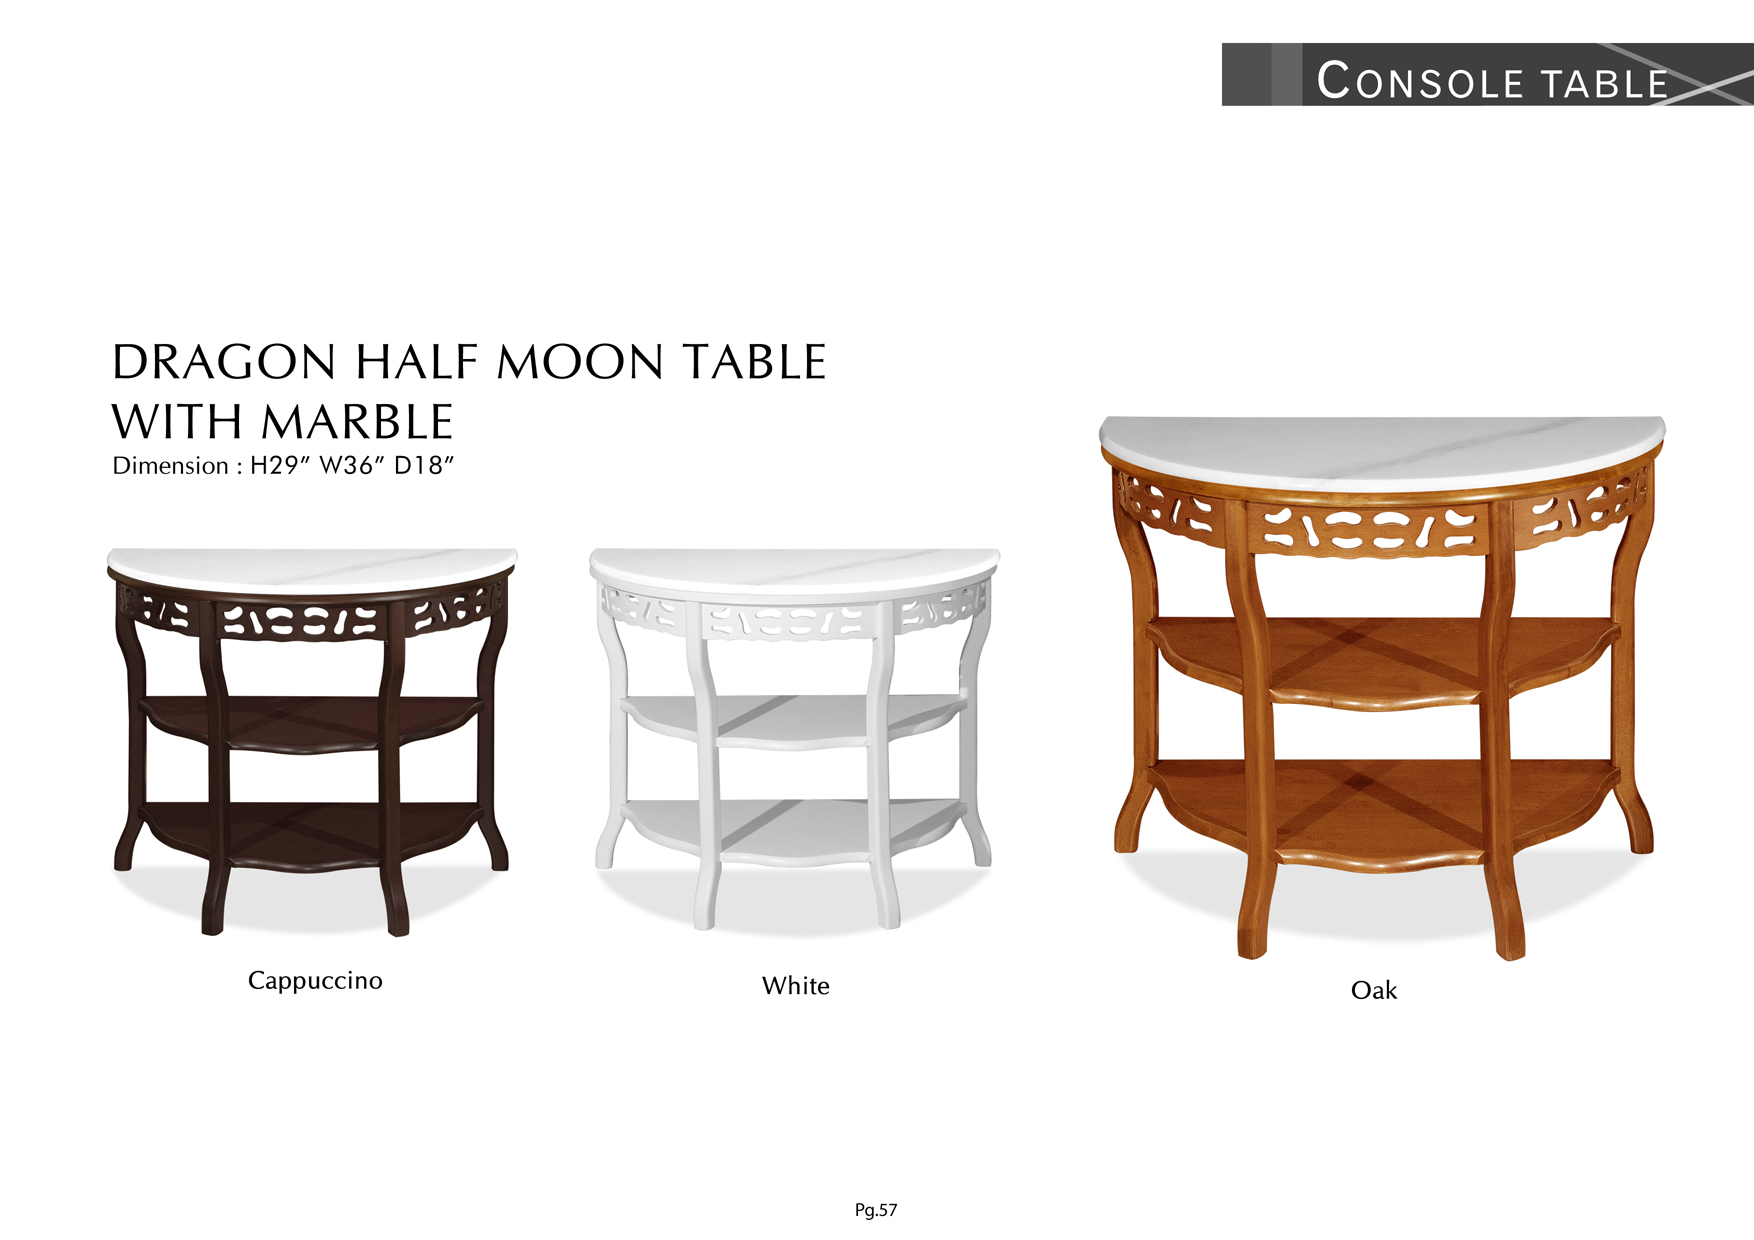 Product: PG57. DRAGON HALF MOON TABLE WITH MARBLE